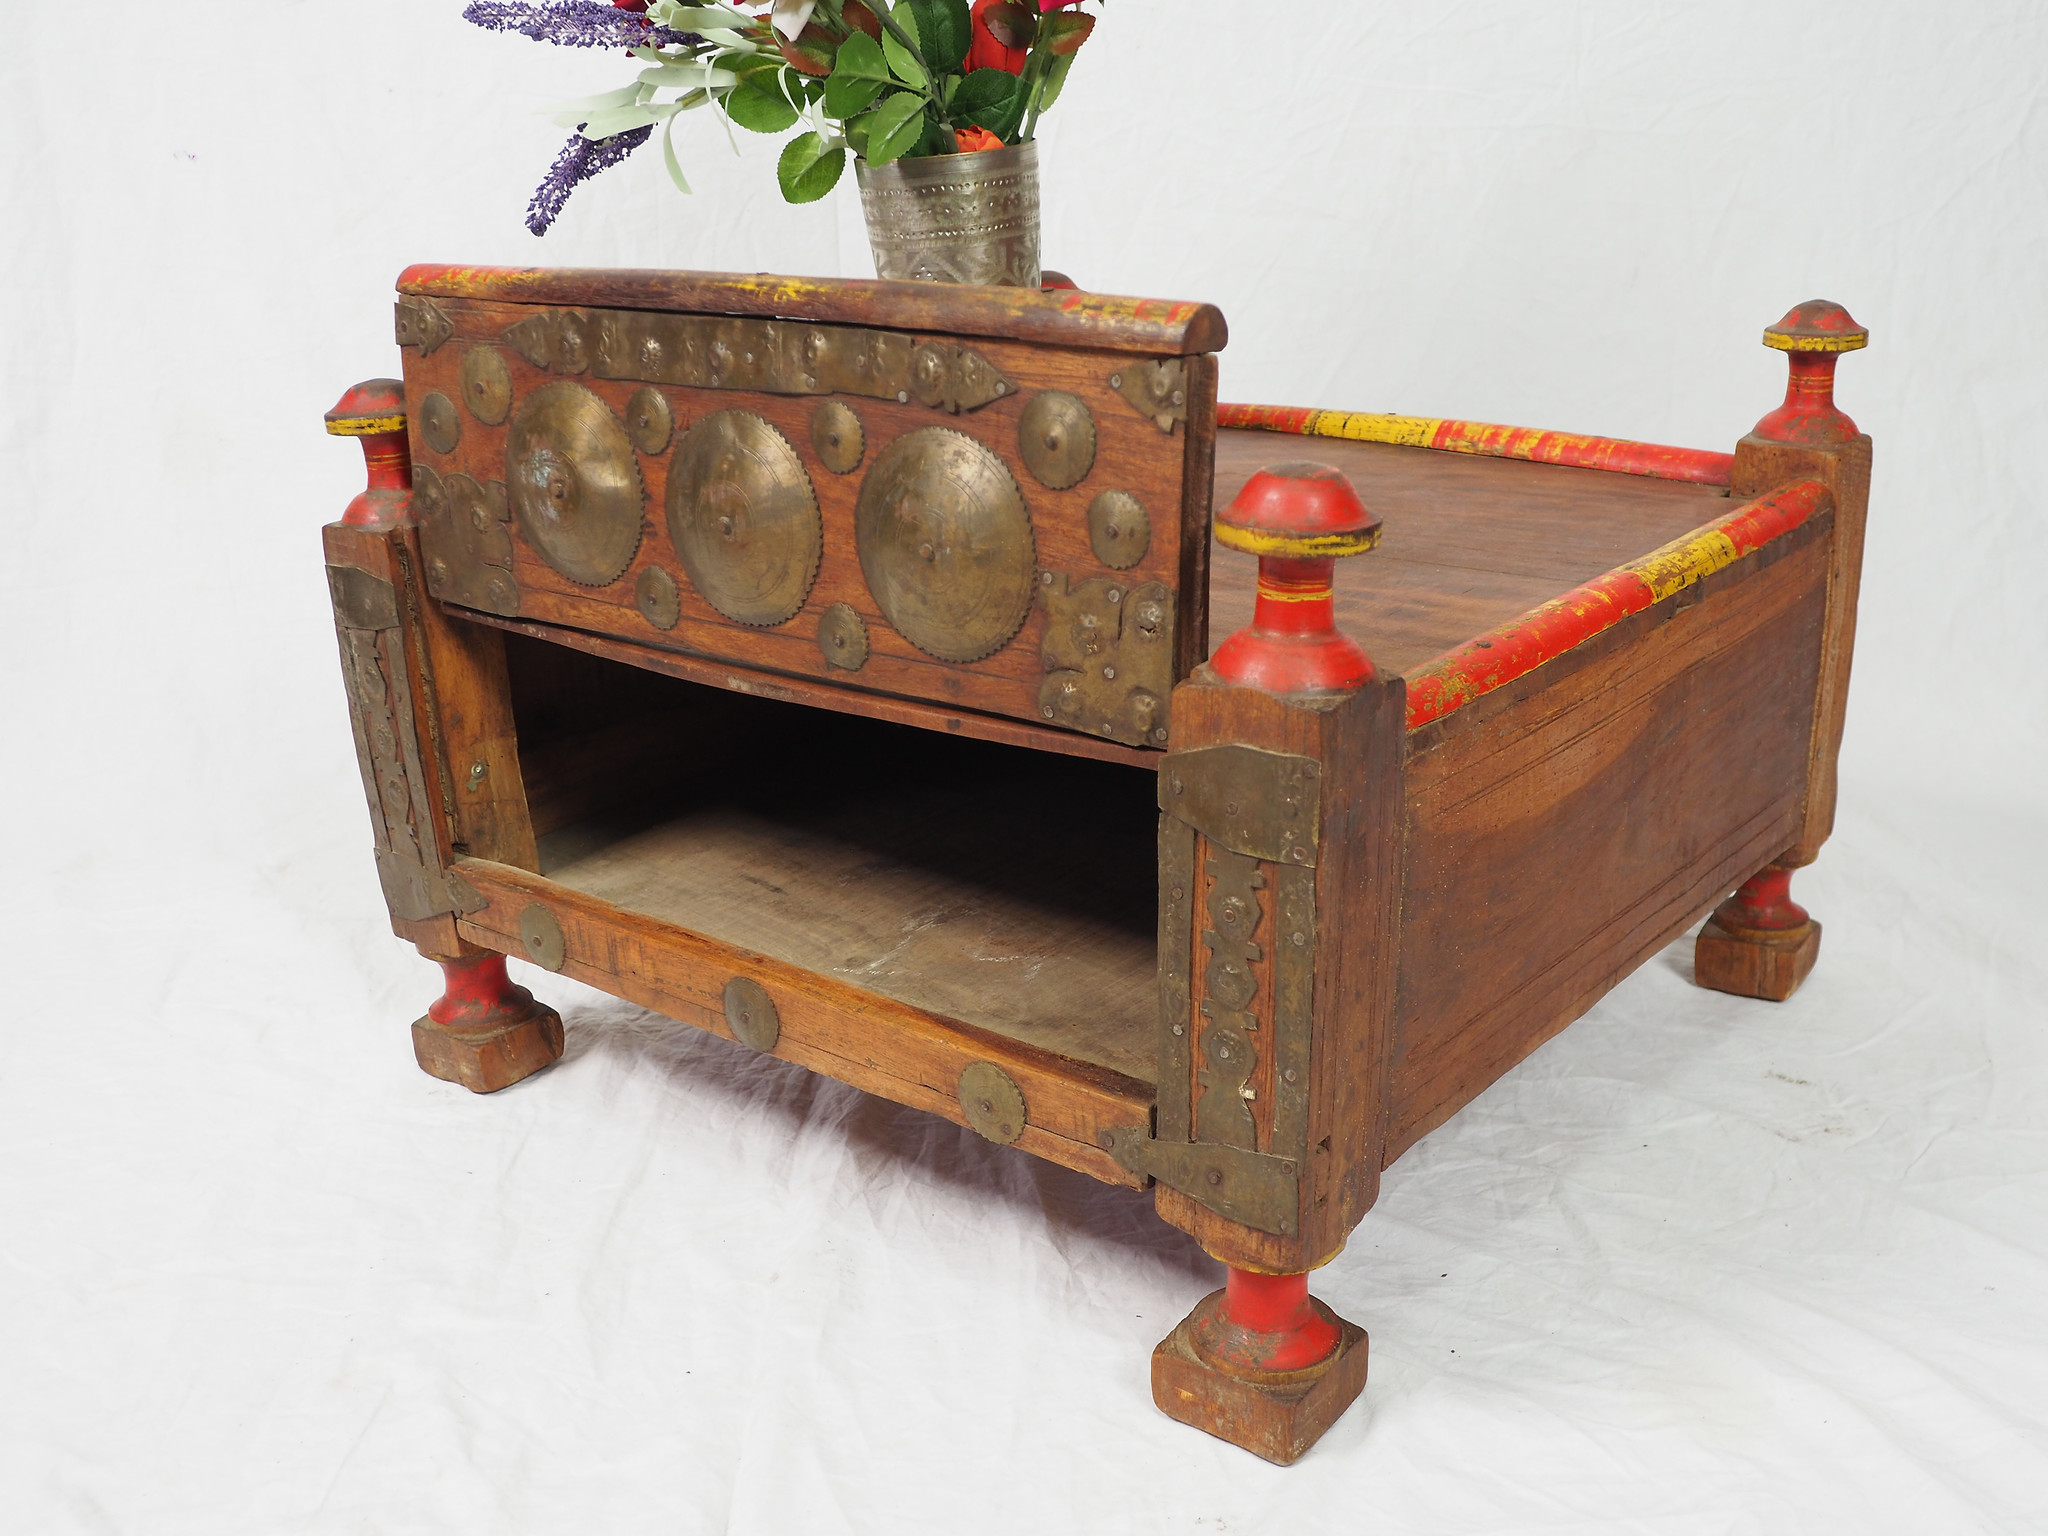 Antique  sidtable   from Afghanistan No:21/B